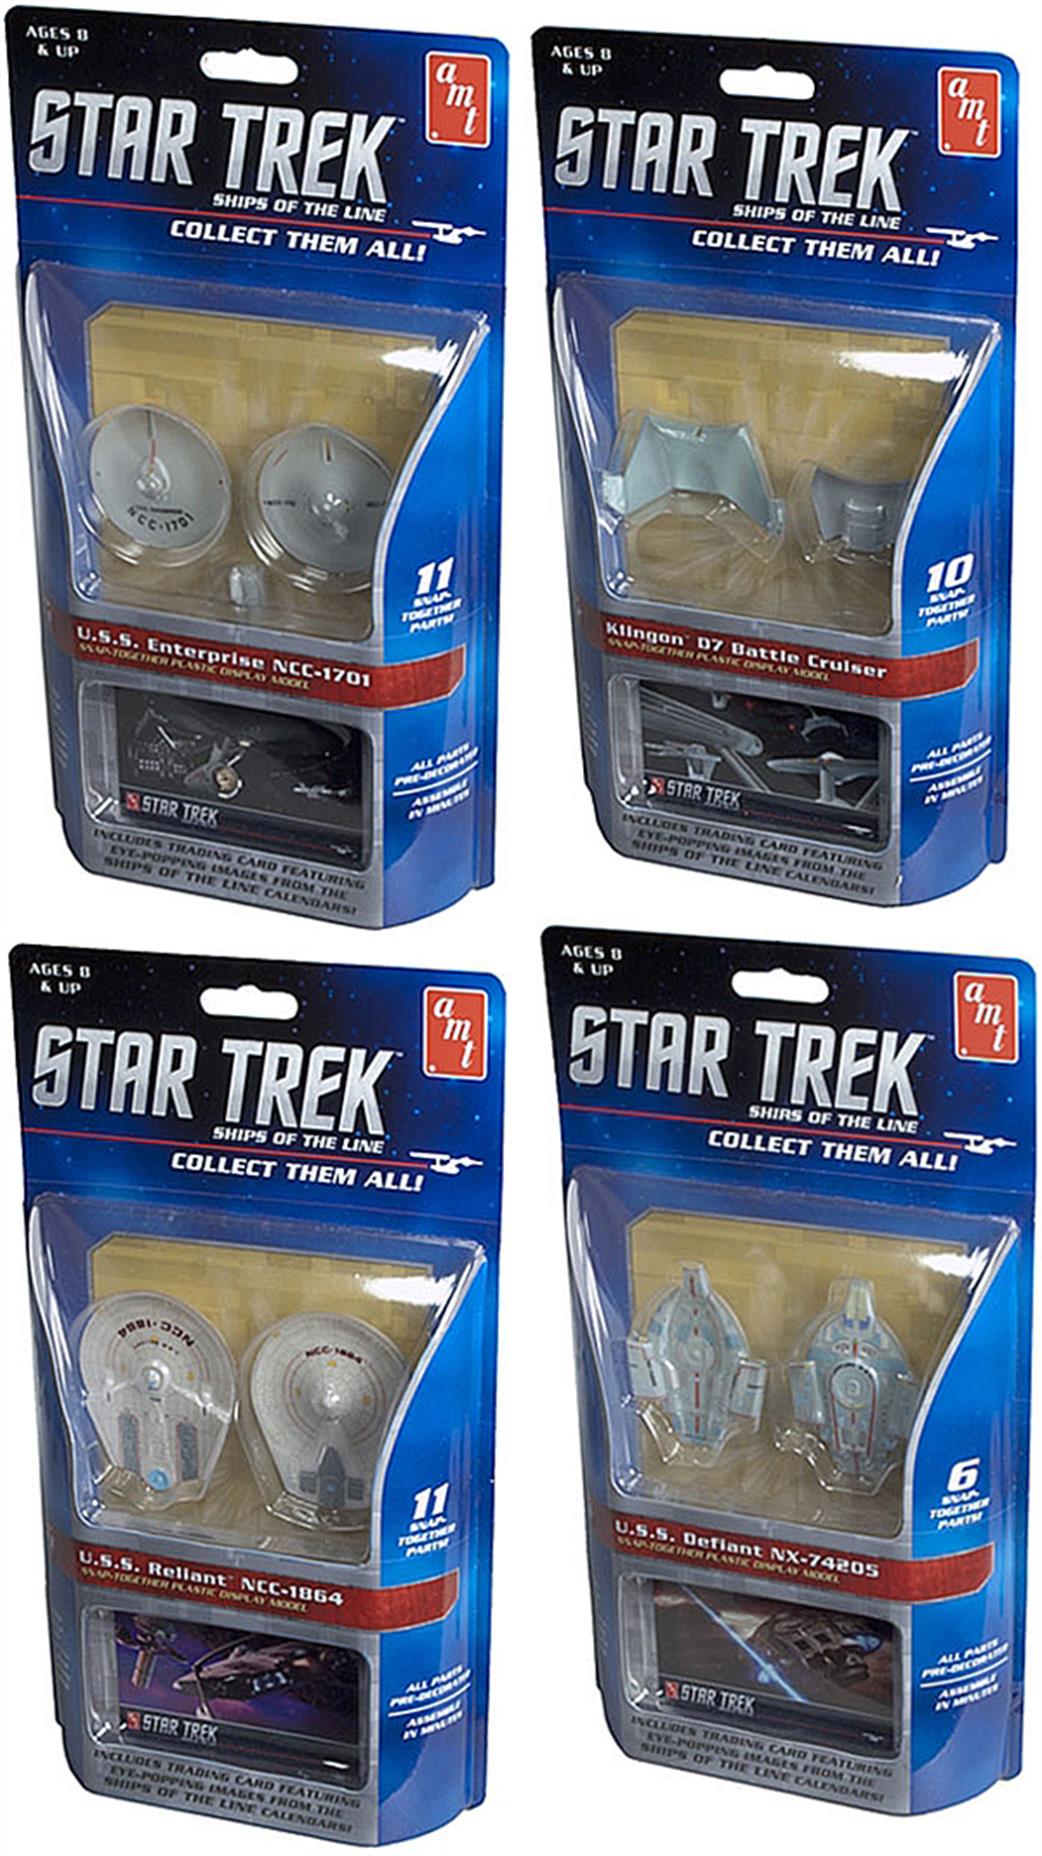 AMT/ERTL 1/2500 AMT914/12 Star Trek Ship of the Line Collectable includes Trading Card